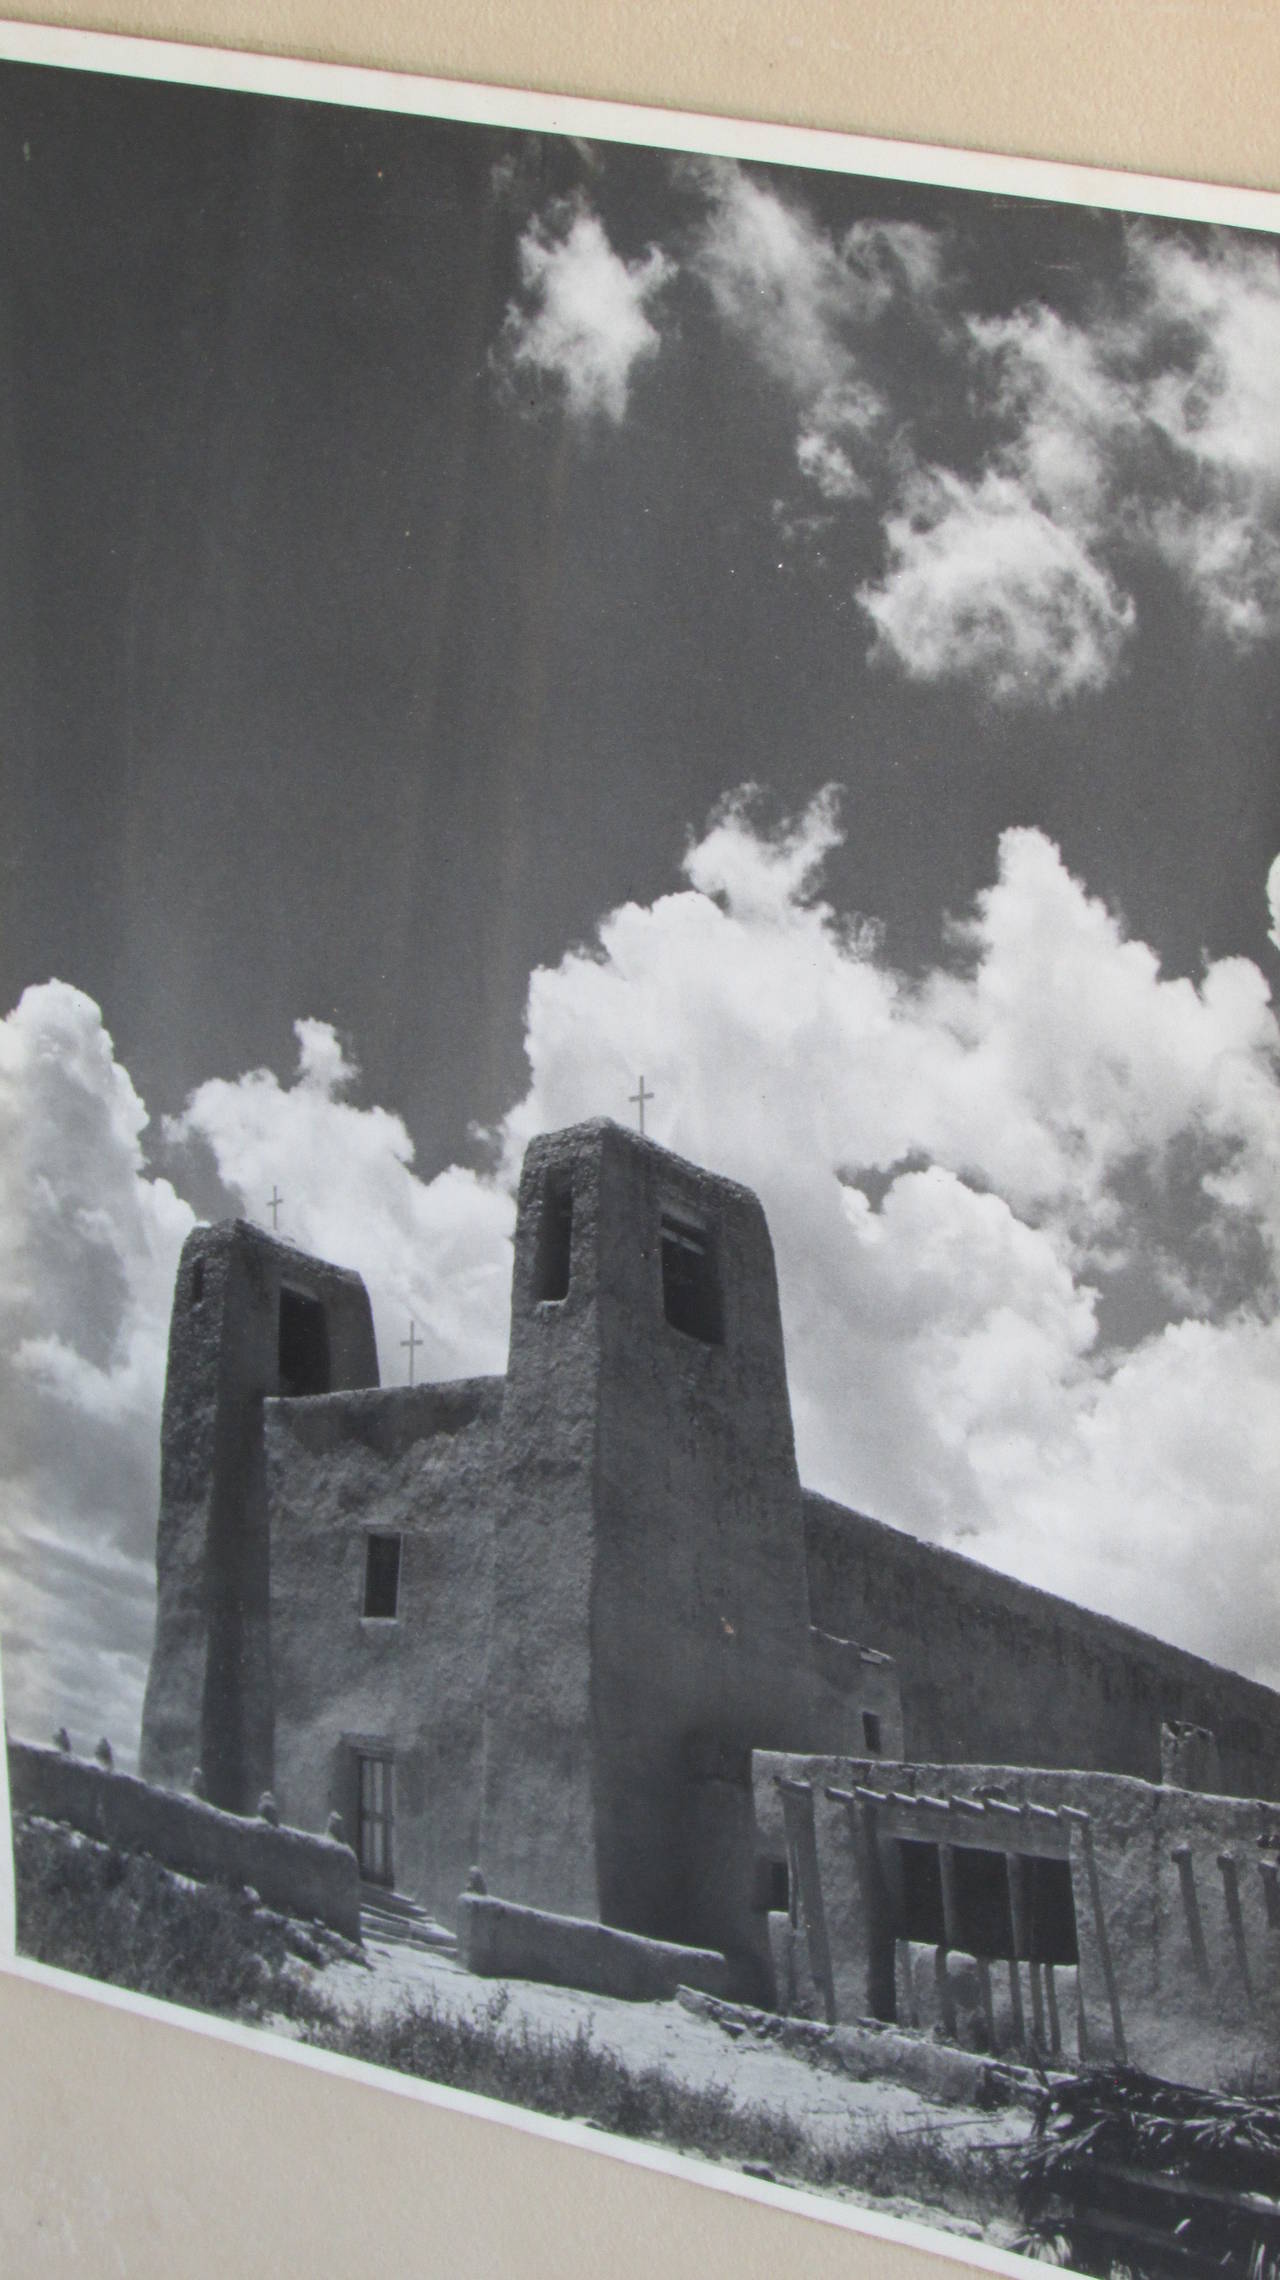 Vintage New Mexico Stark Landscape Photograph with Mission Church 2